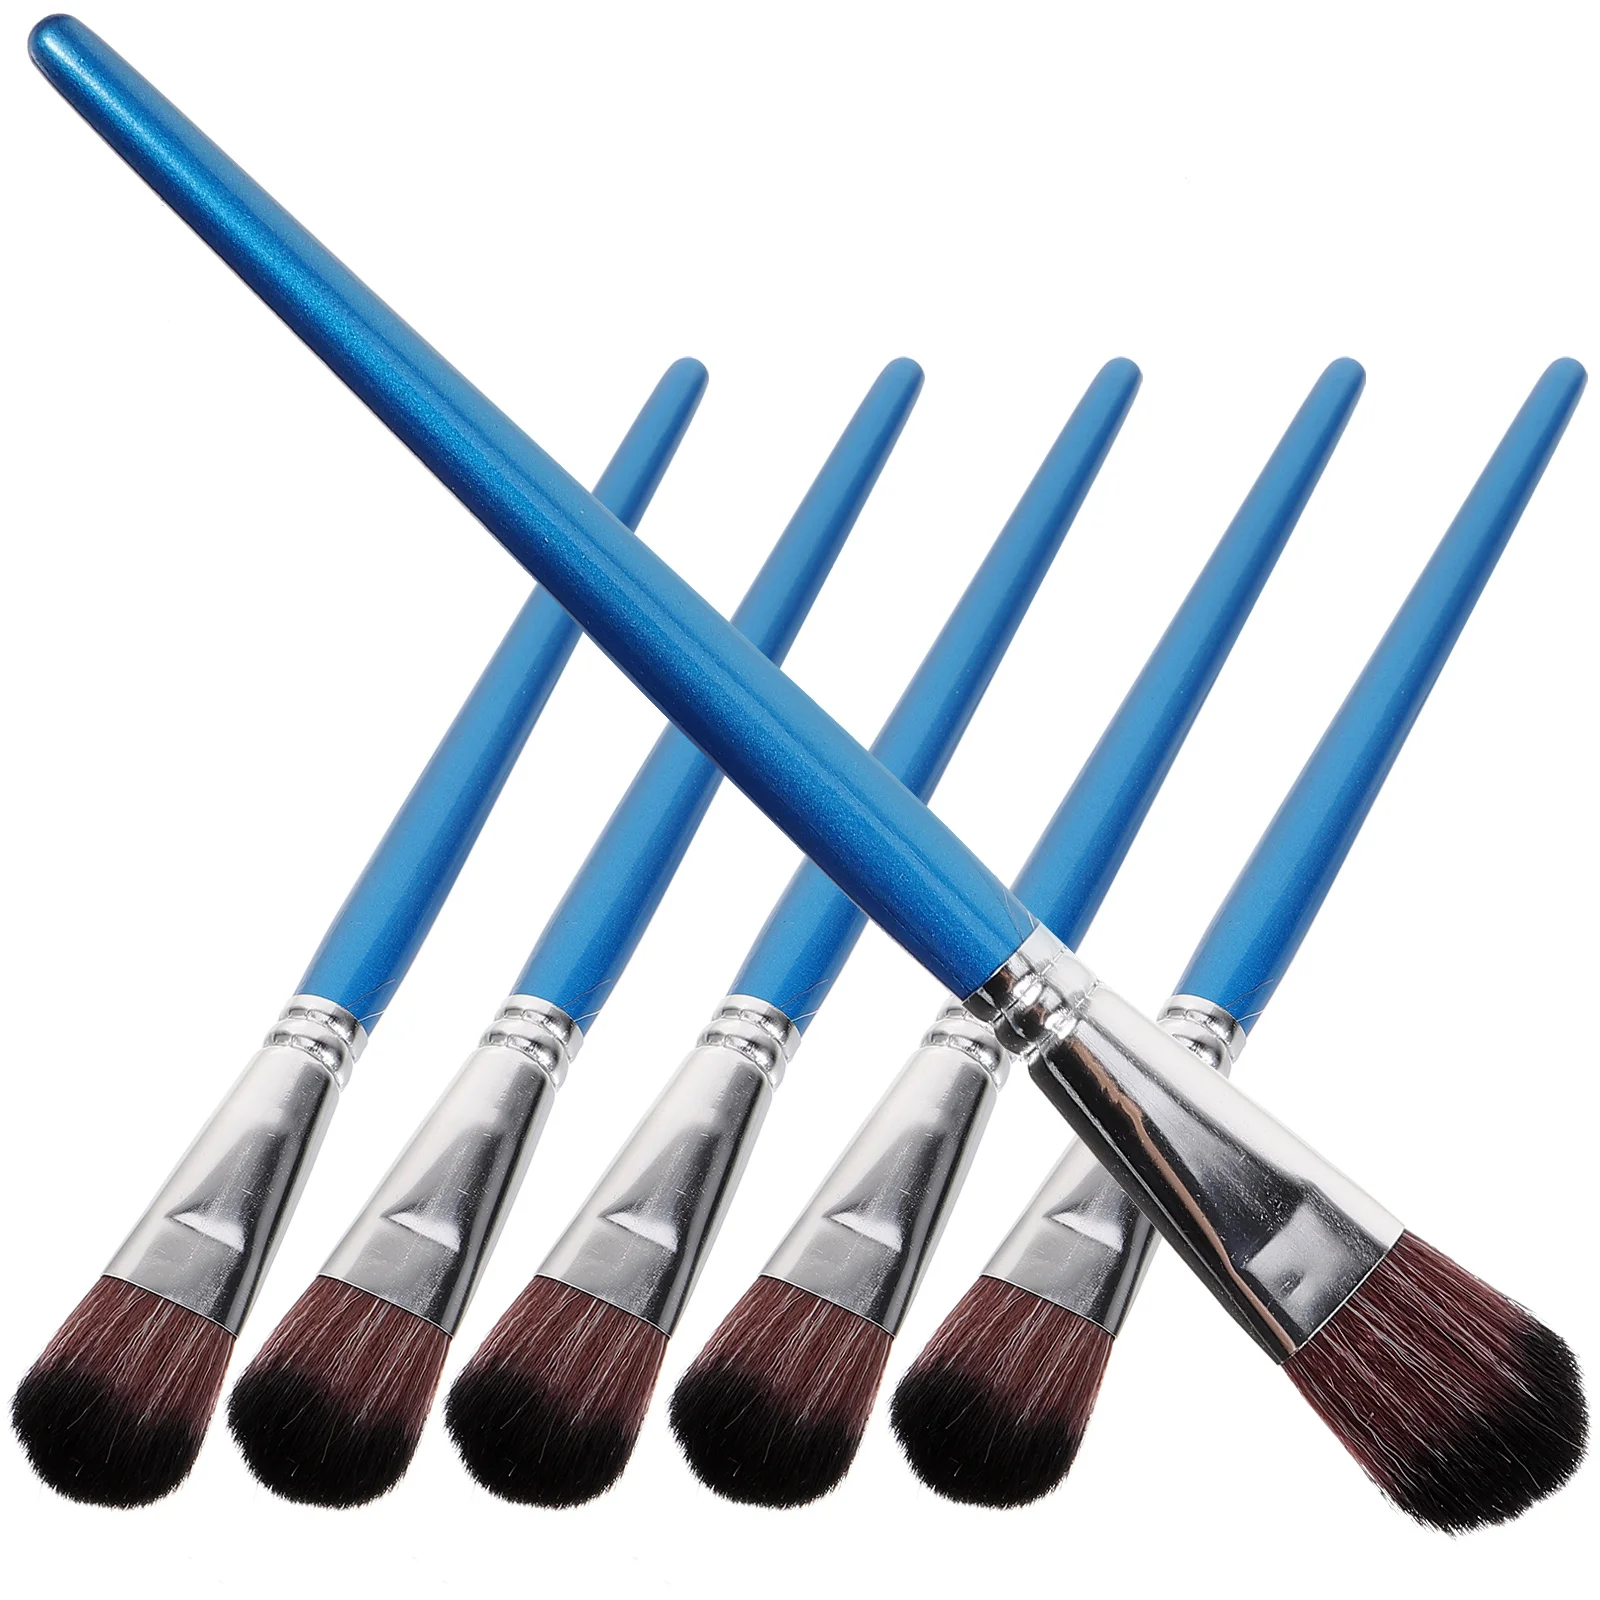 

6 Pcs Students Paint Brush for Painting Oil Paintbrush Supplies Wooden Paintbrushes